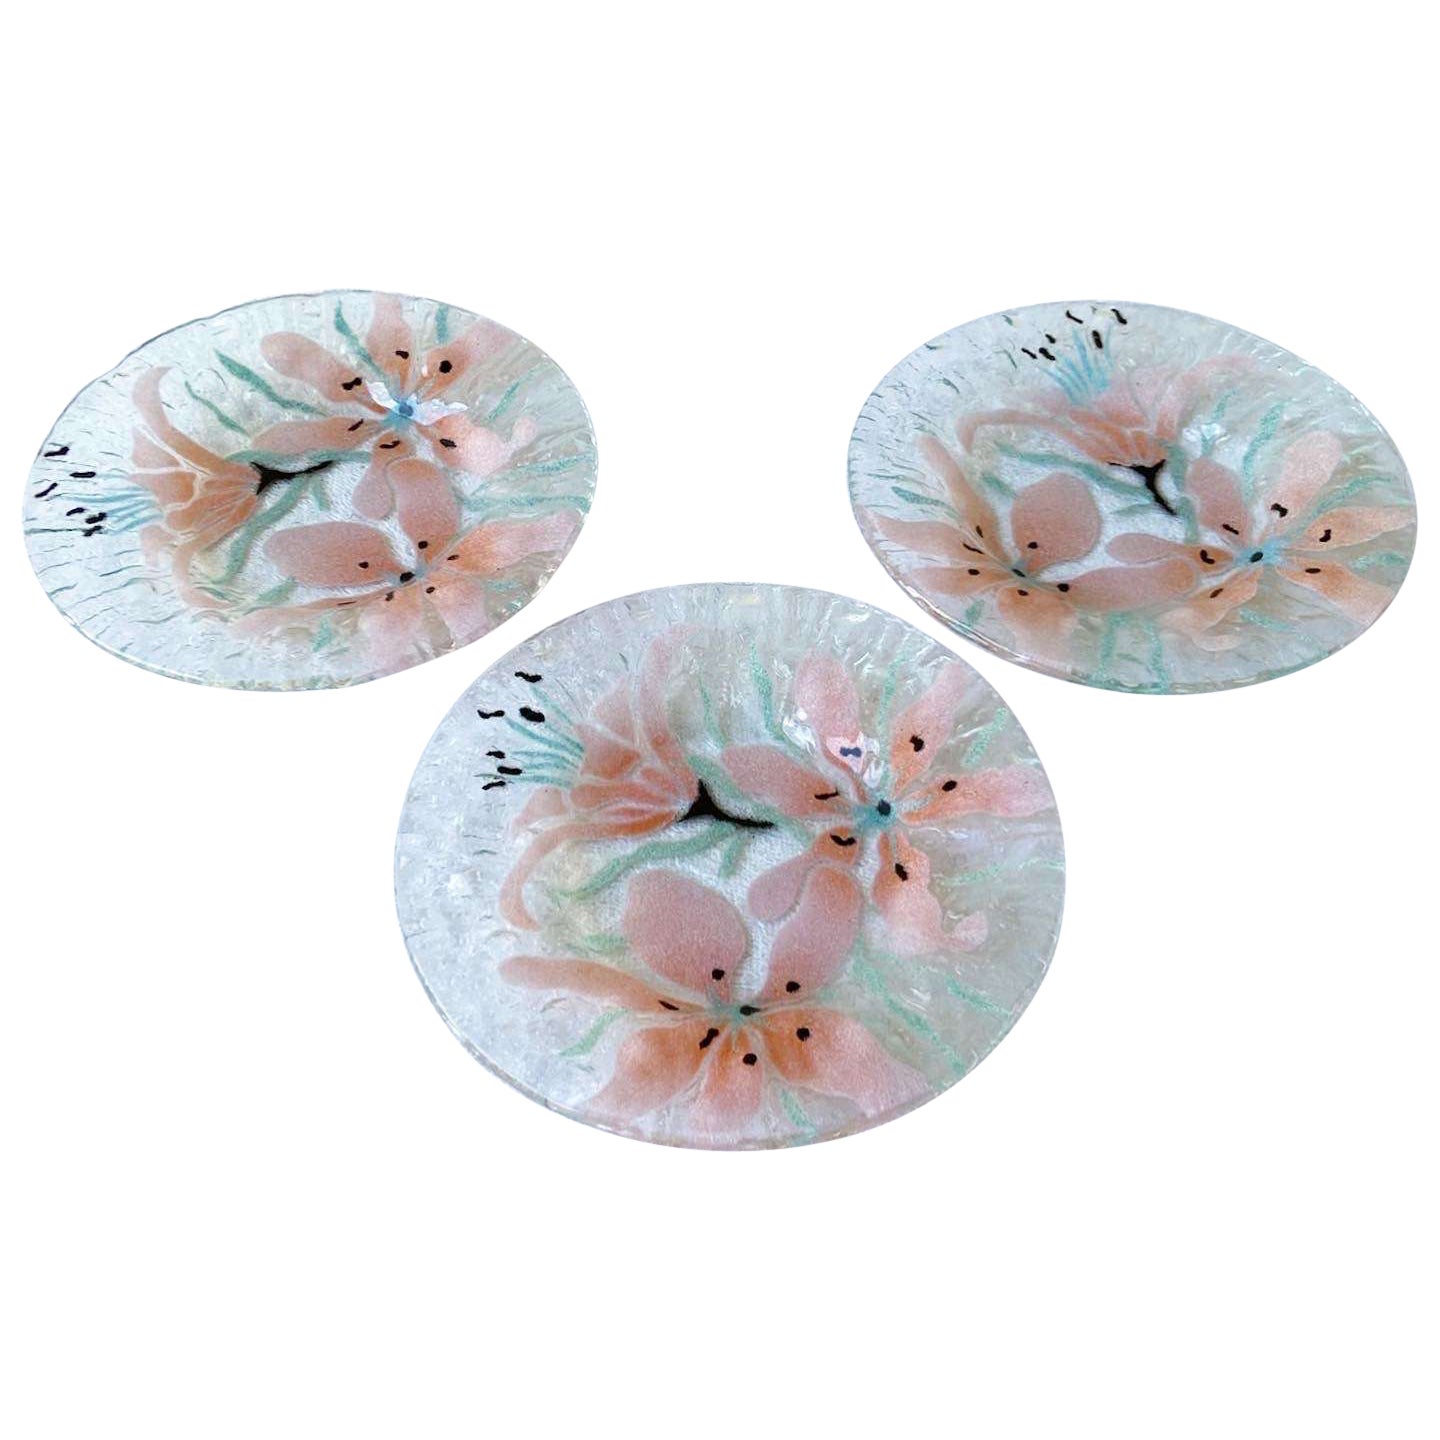 Vintage Glass Hand Painted Flower Plates - Set of 3 For Sale